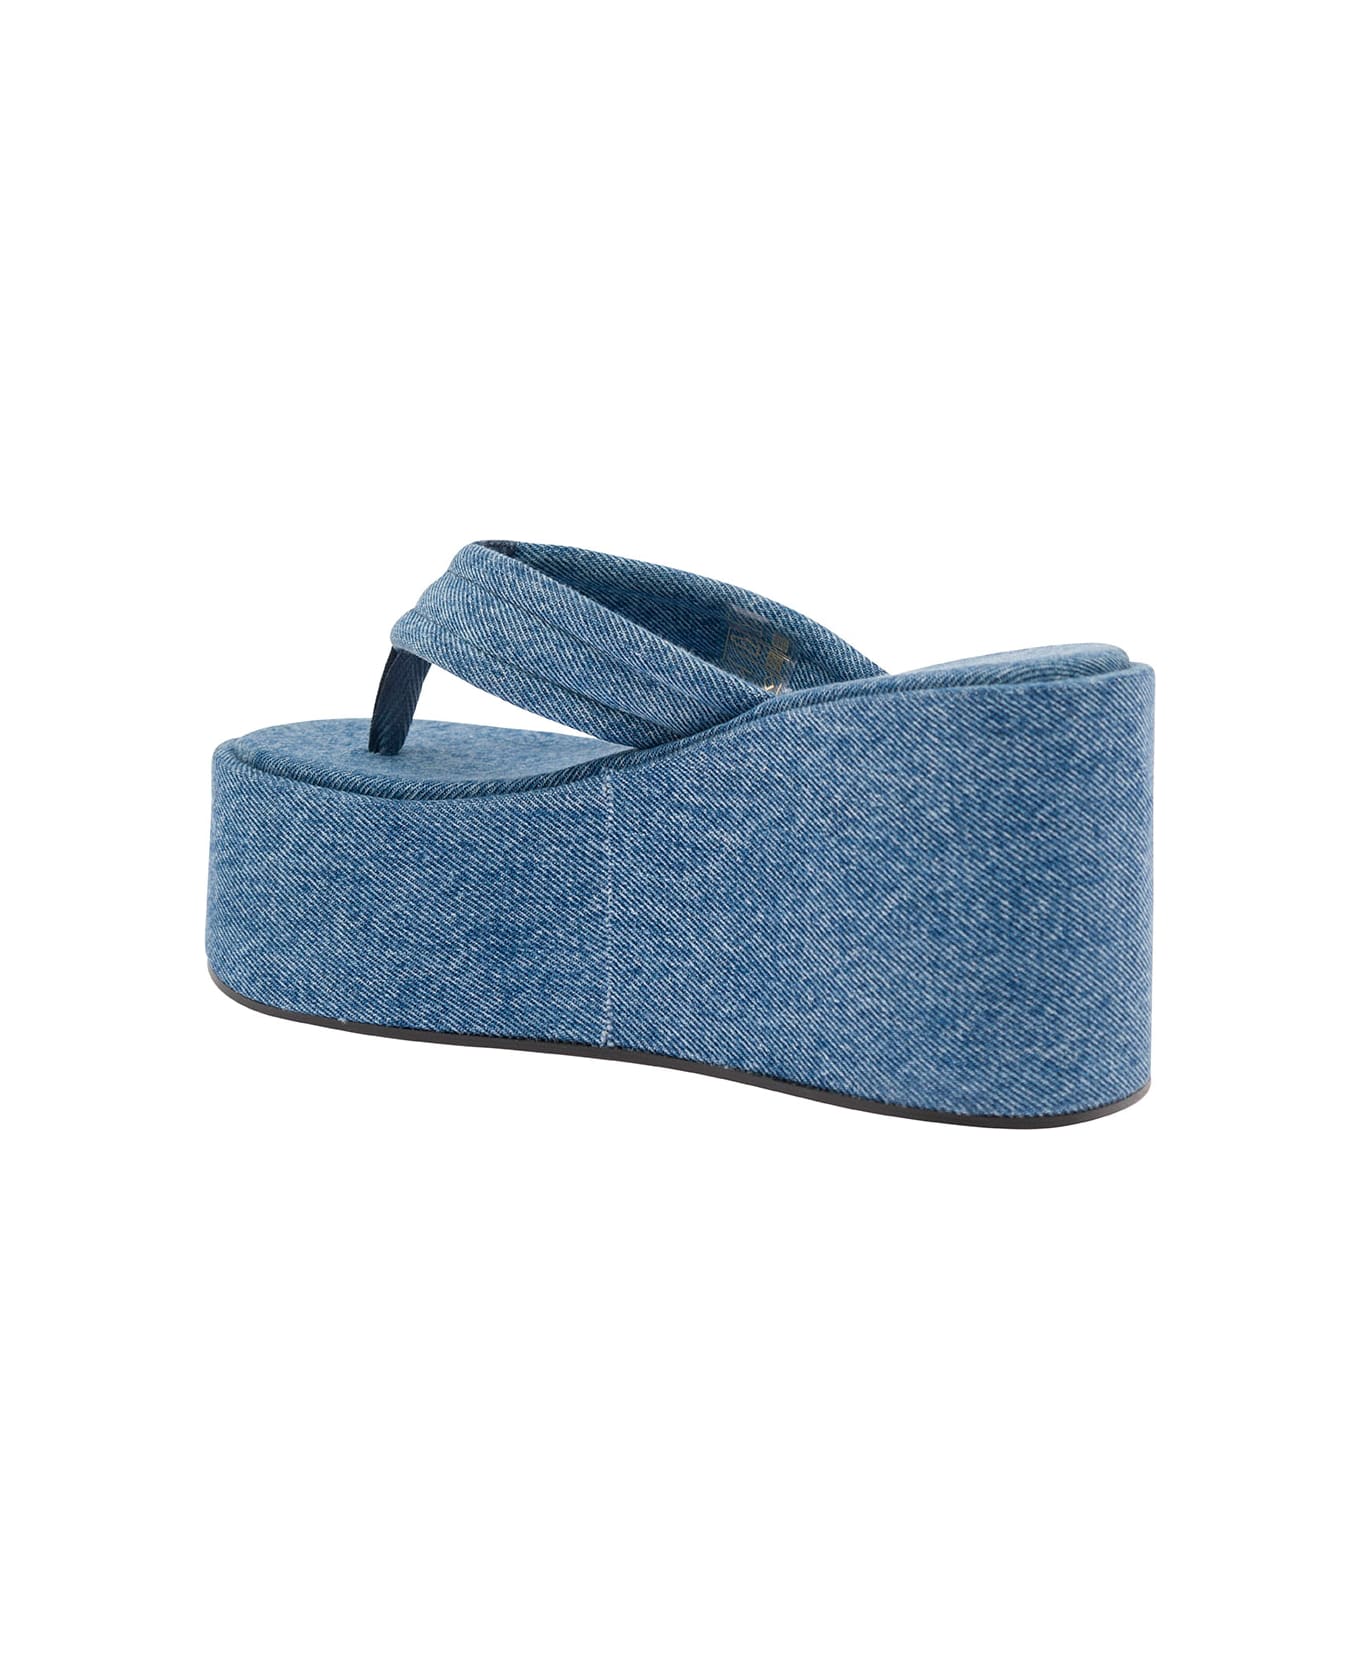 Coperni Light Blue Sandals With Wedge And Logo Patch In Denim Woman - Blu サンダル